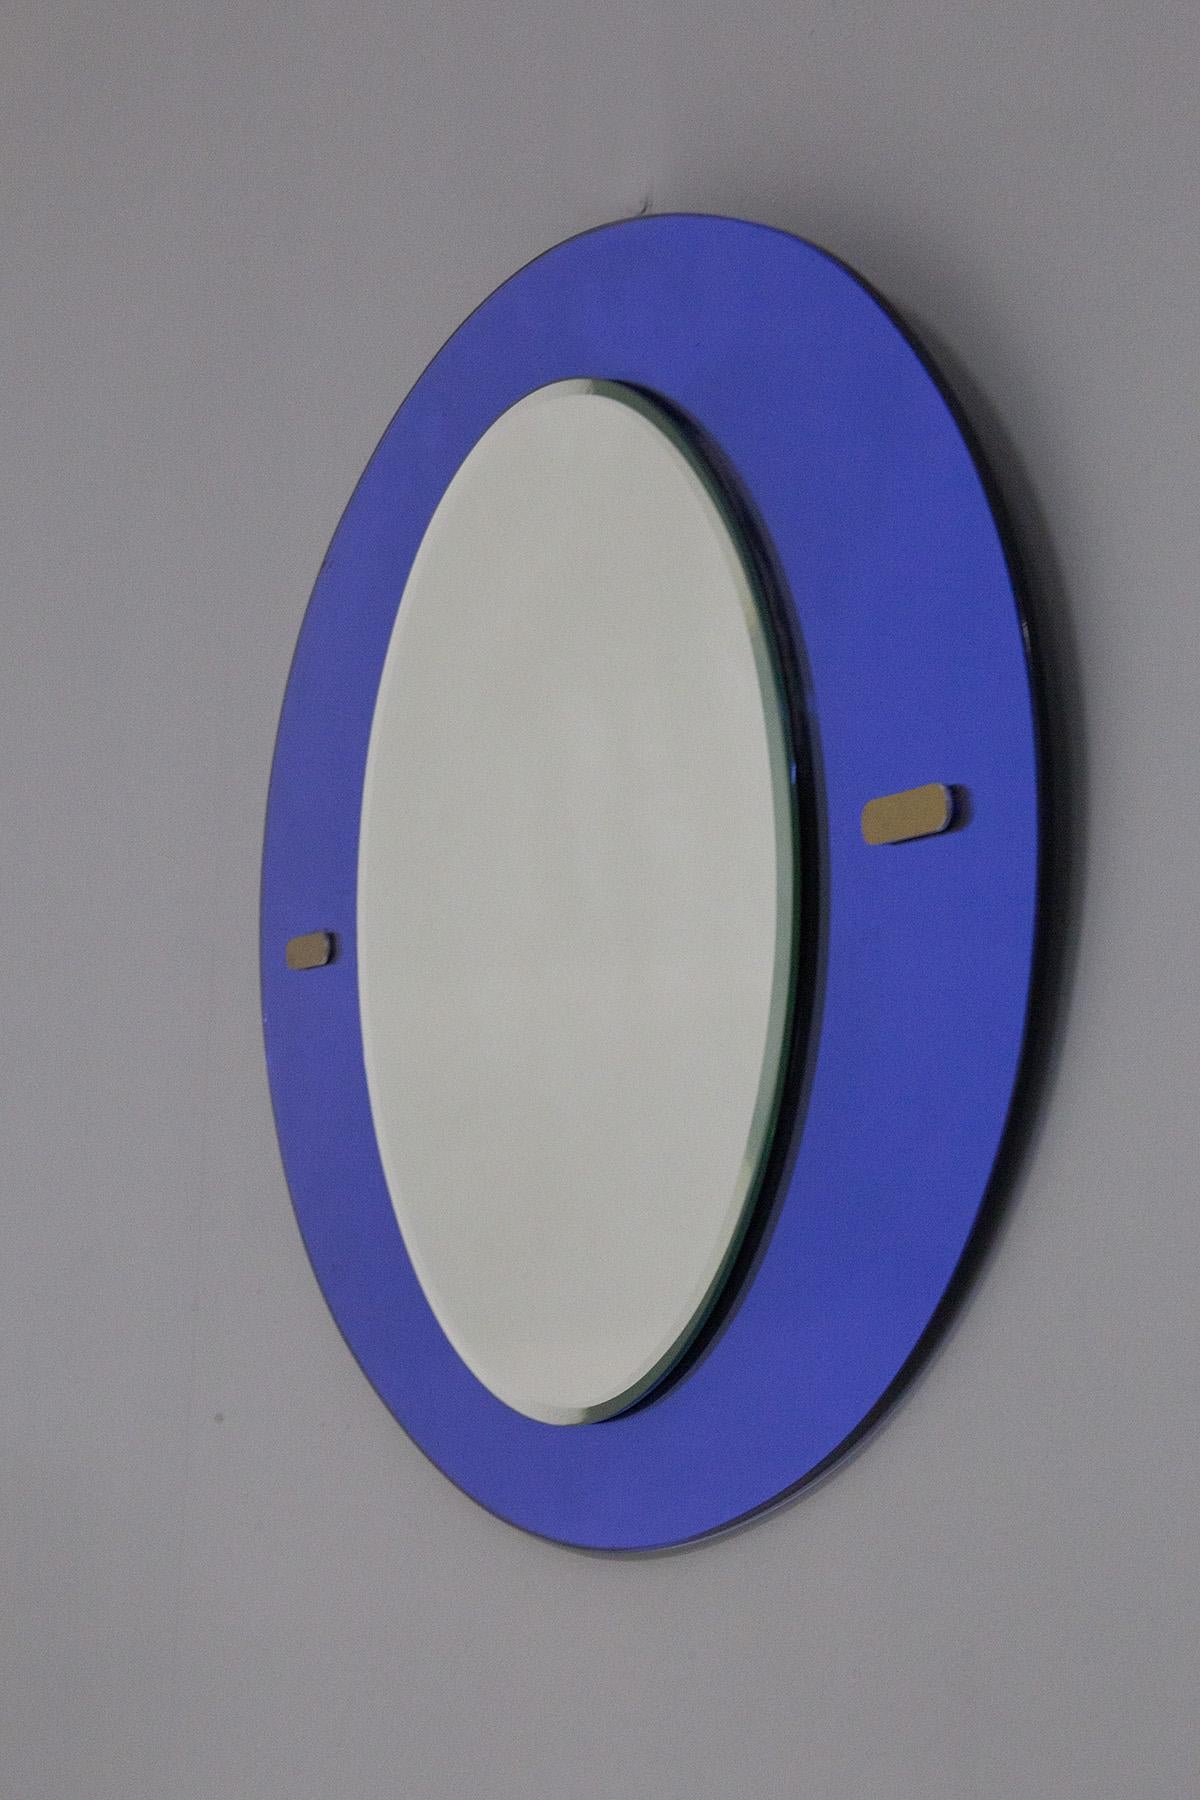 Mid-Century Modern Midcentury Mirror in the Style of Fontana Arte For Sale